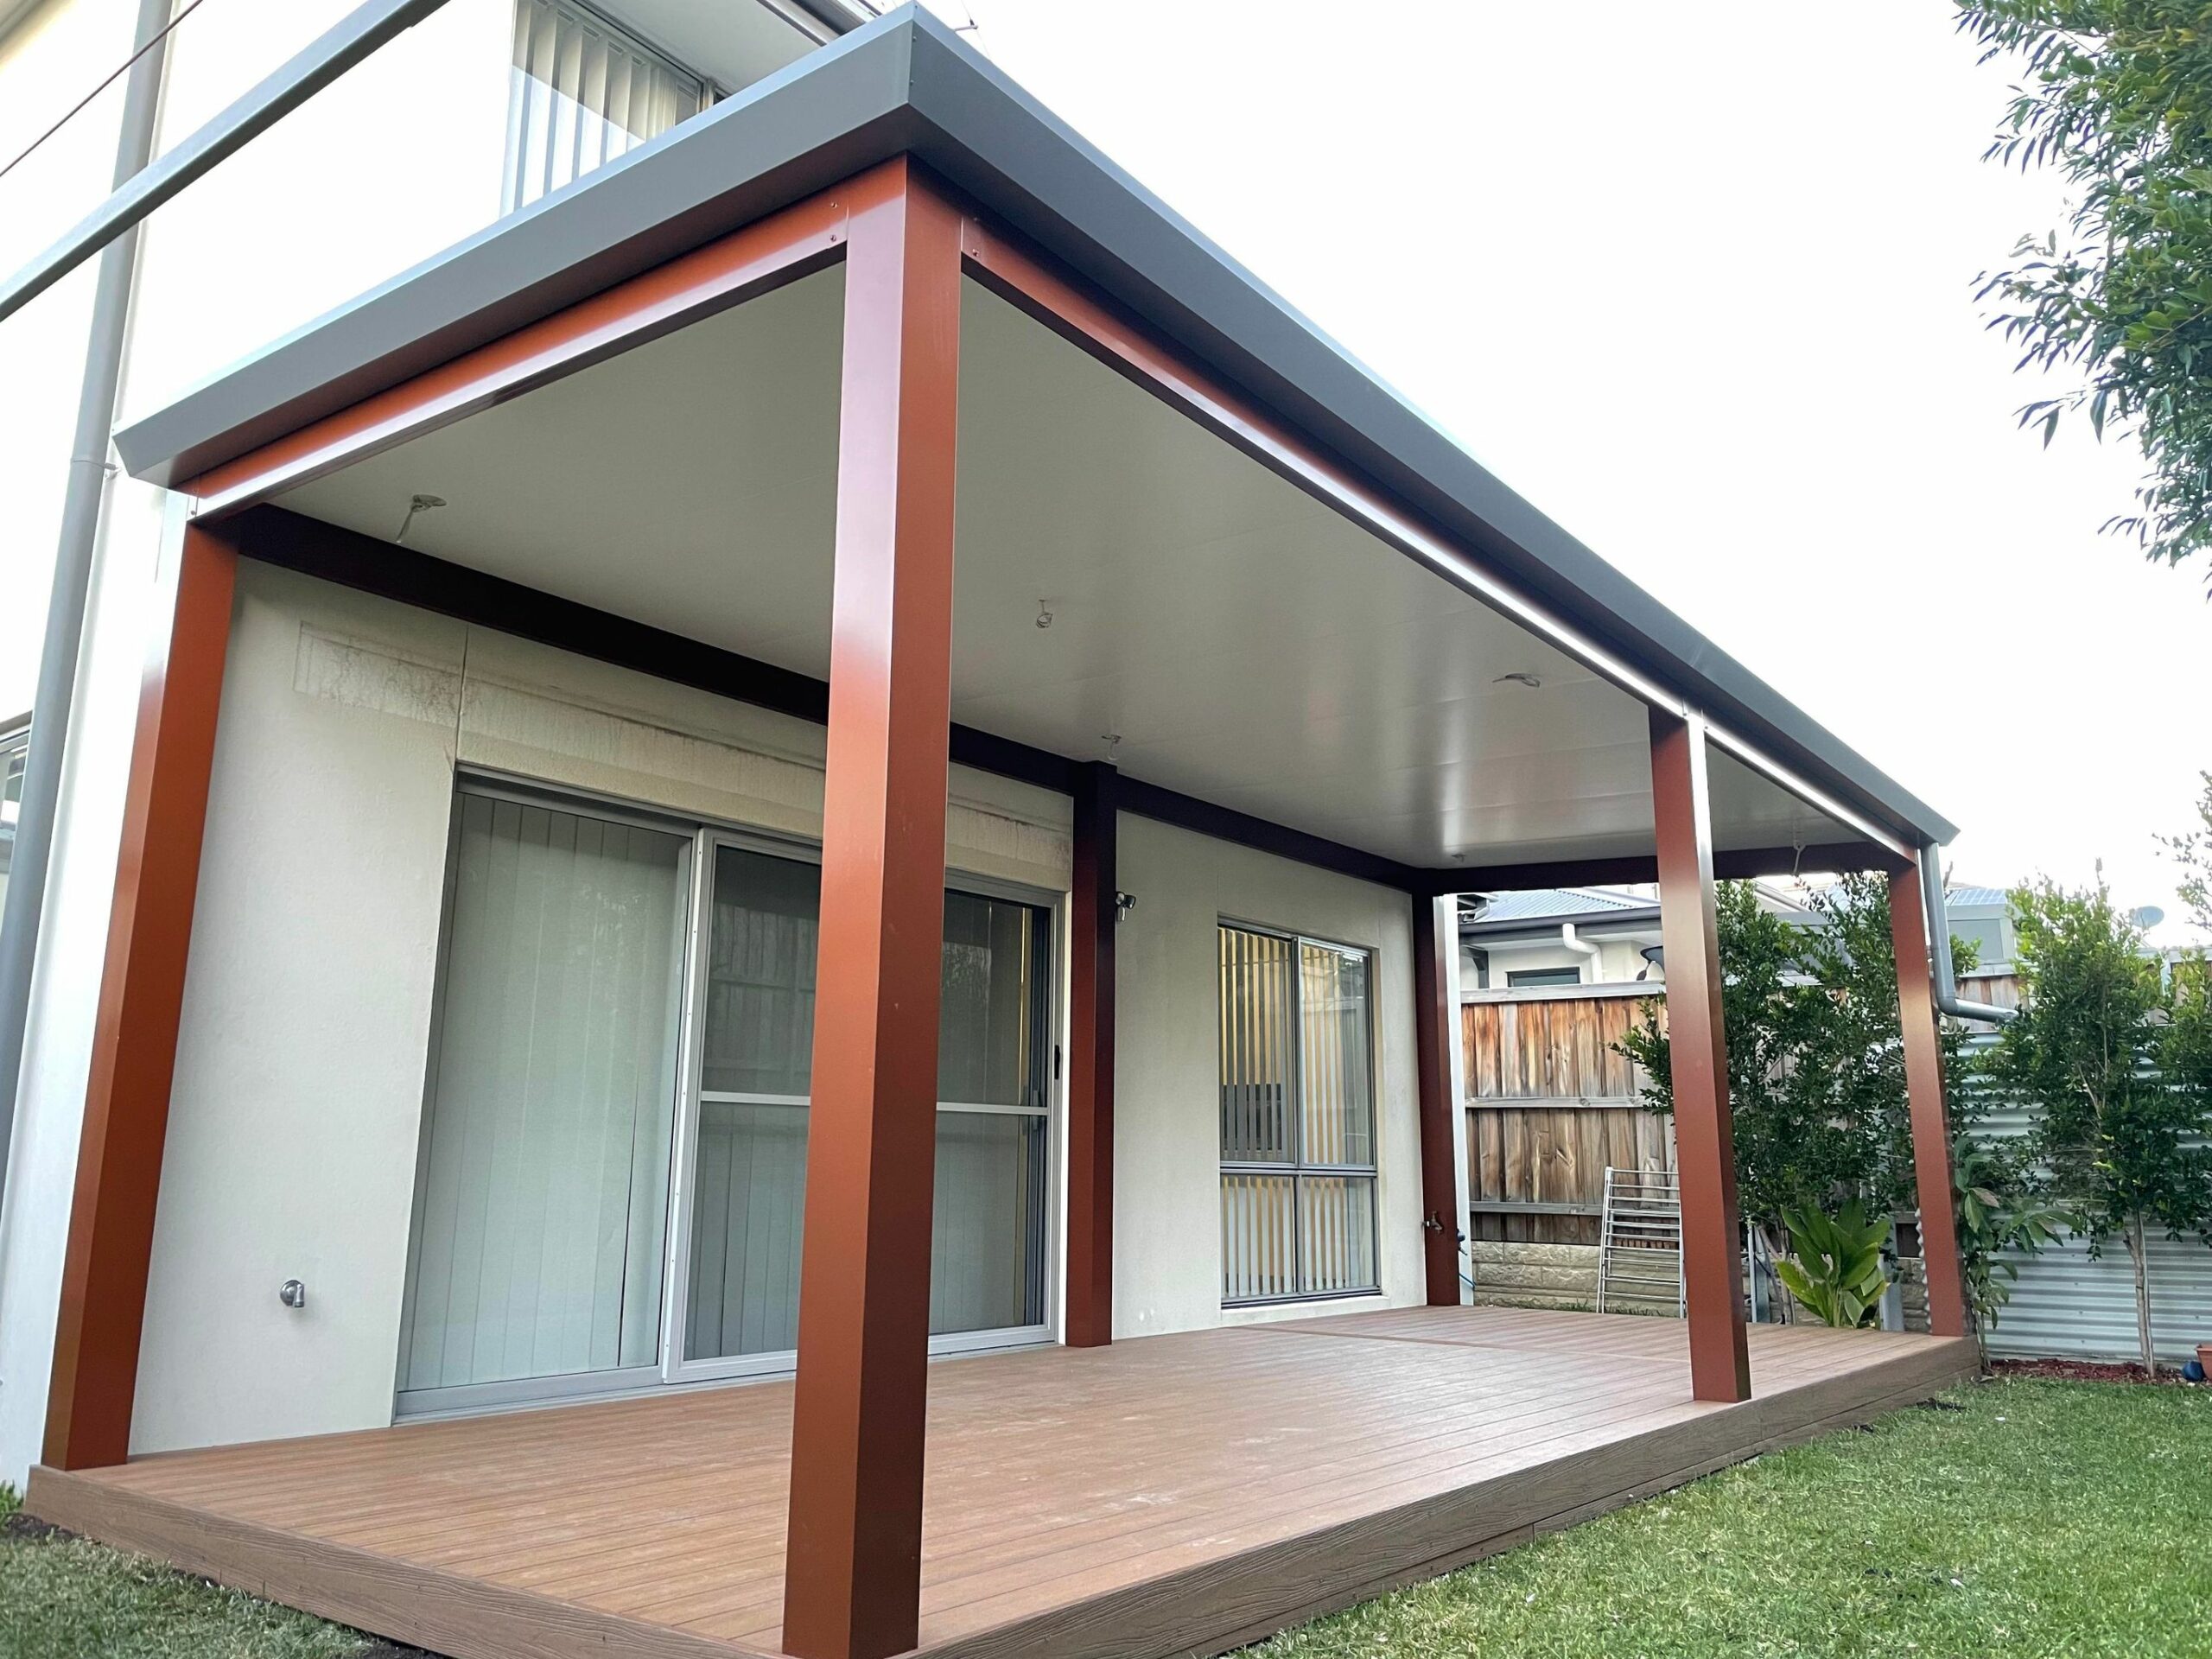 Composite Decking & Insulated Roof at Moorebank